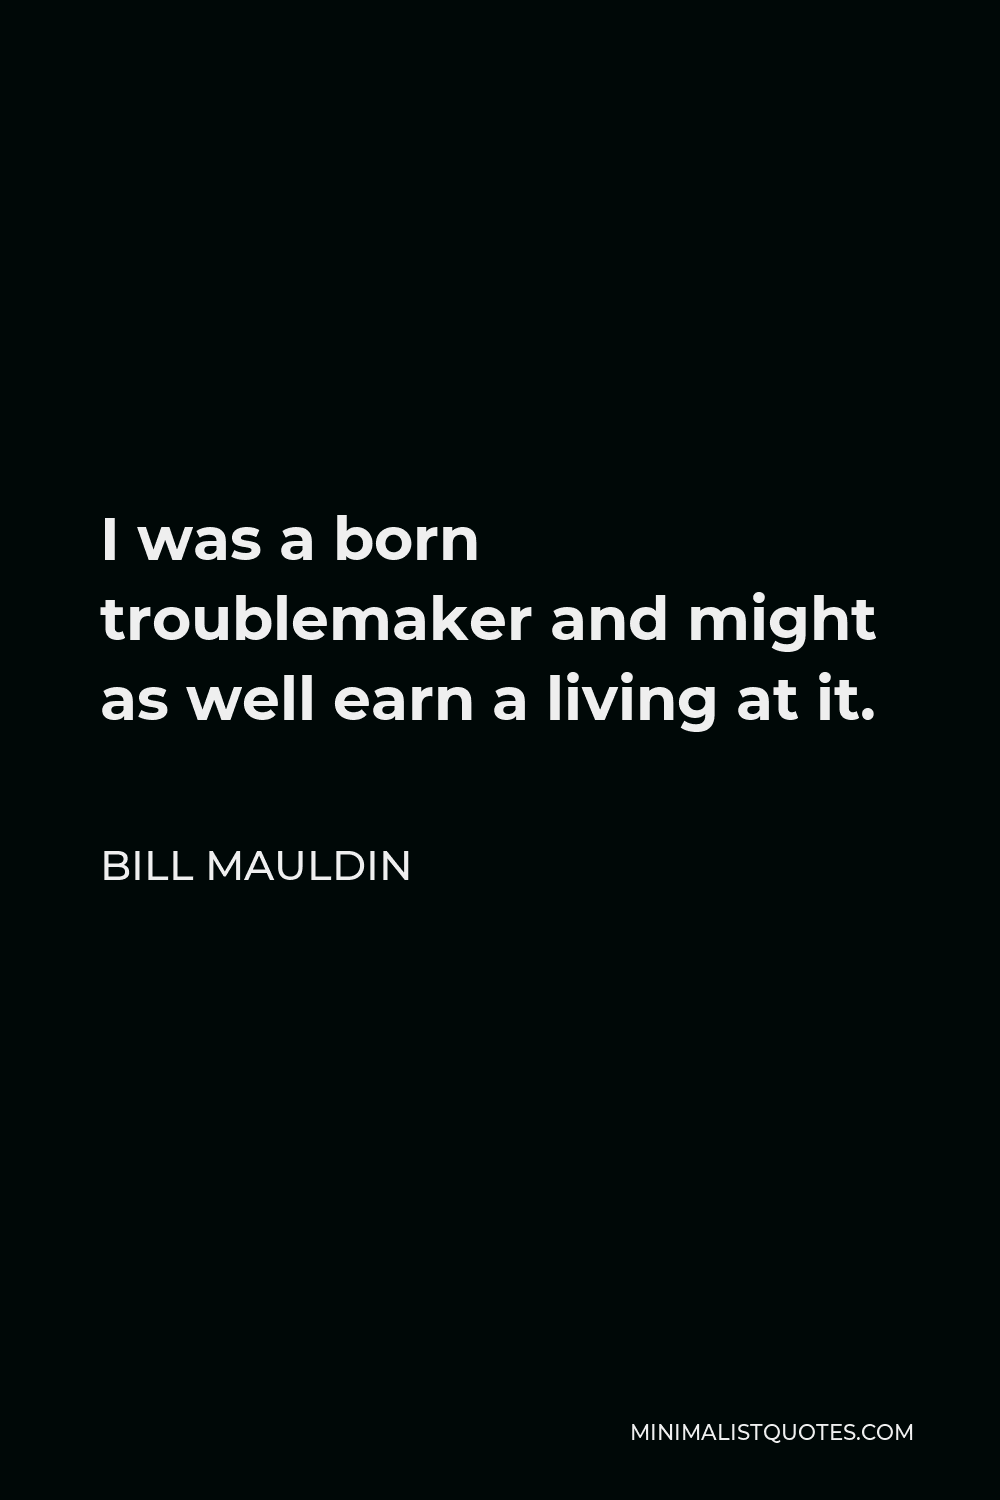 Bill Mauldin Quote - I was a born troublemaker and might as well earn a living at it.